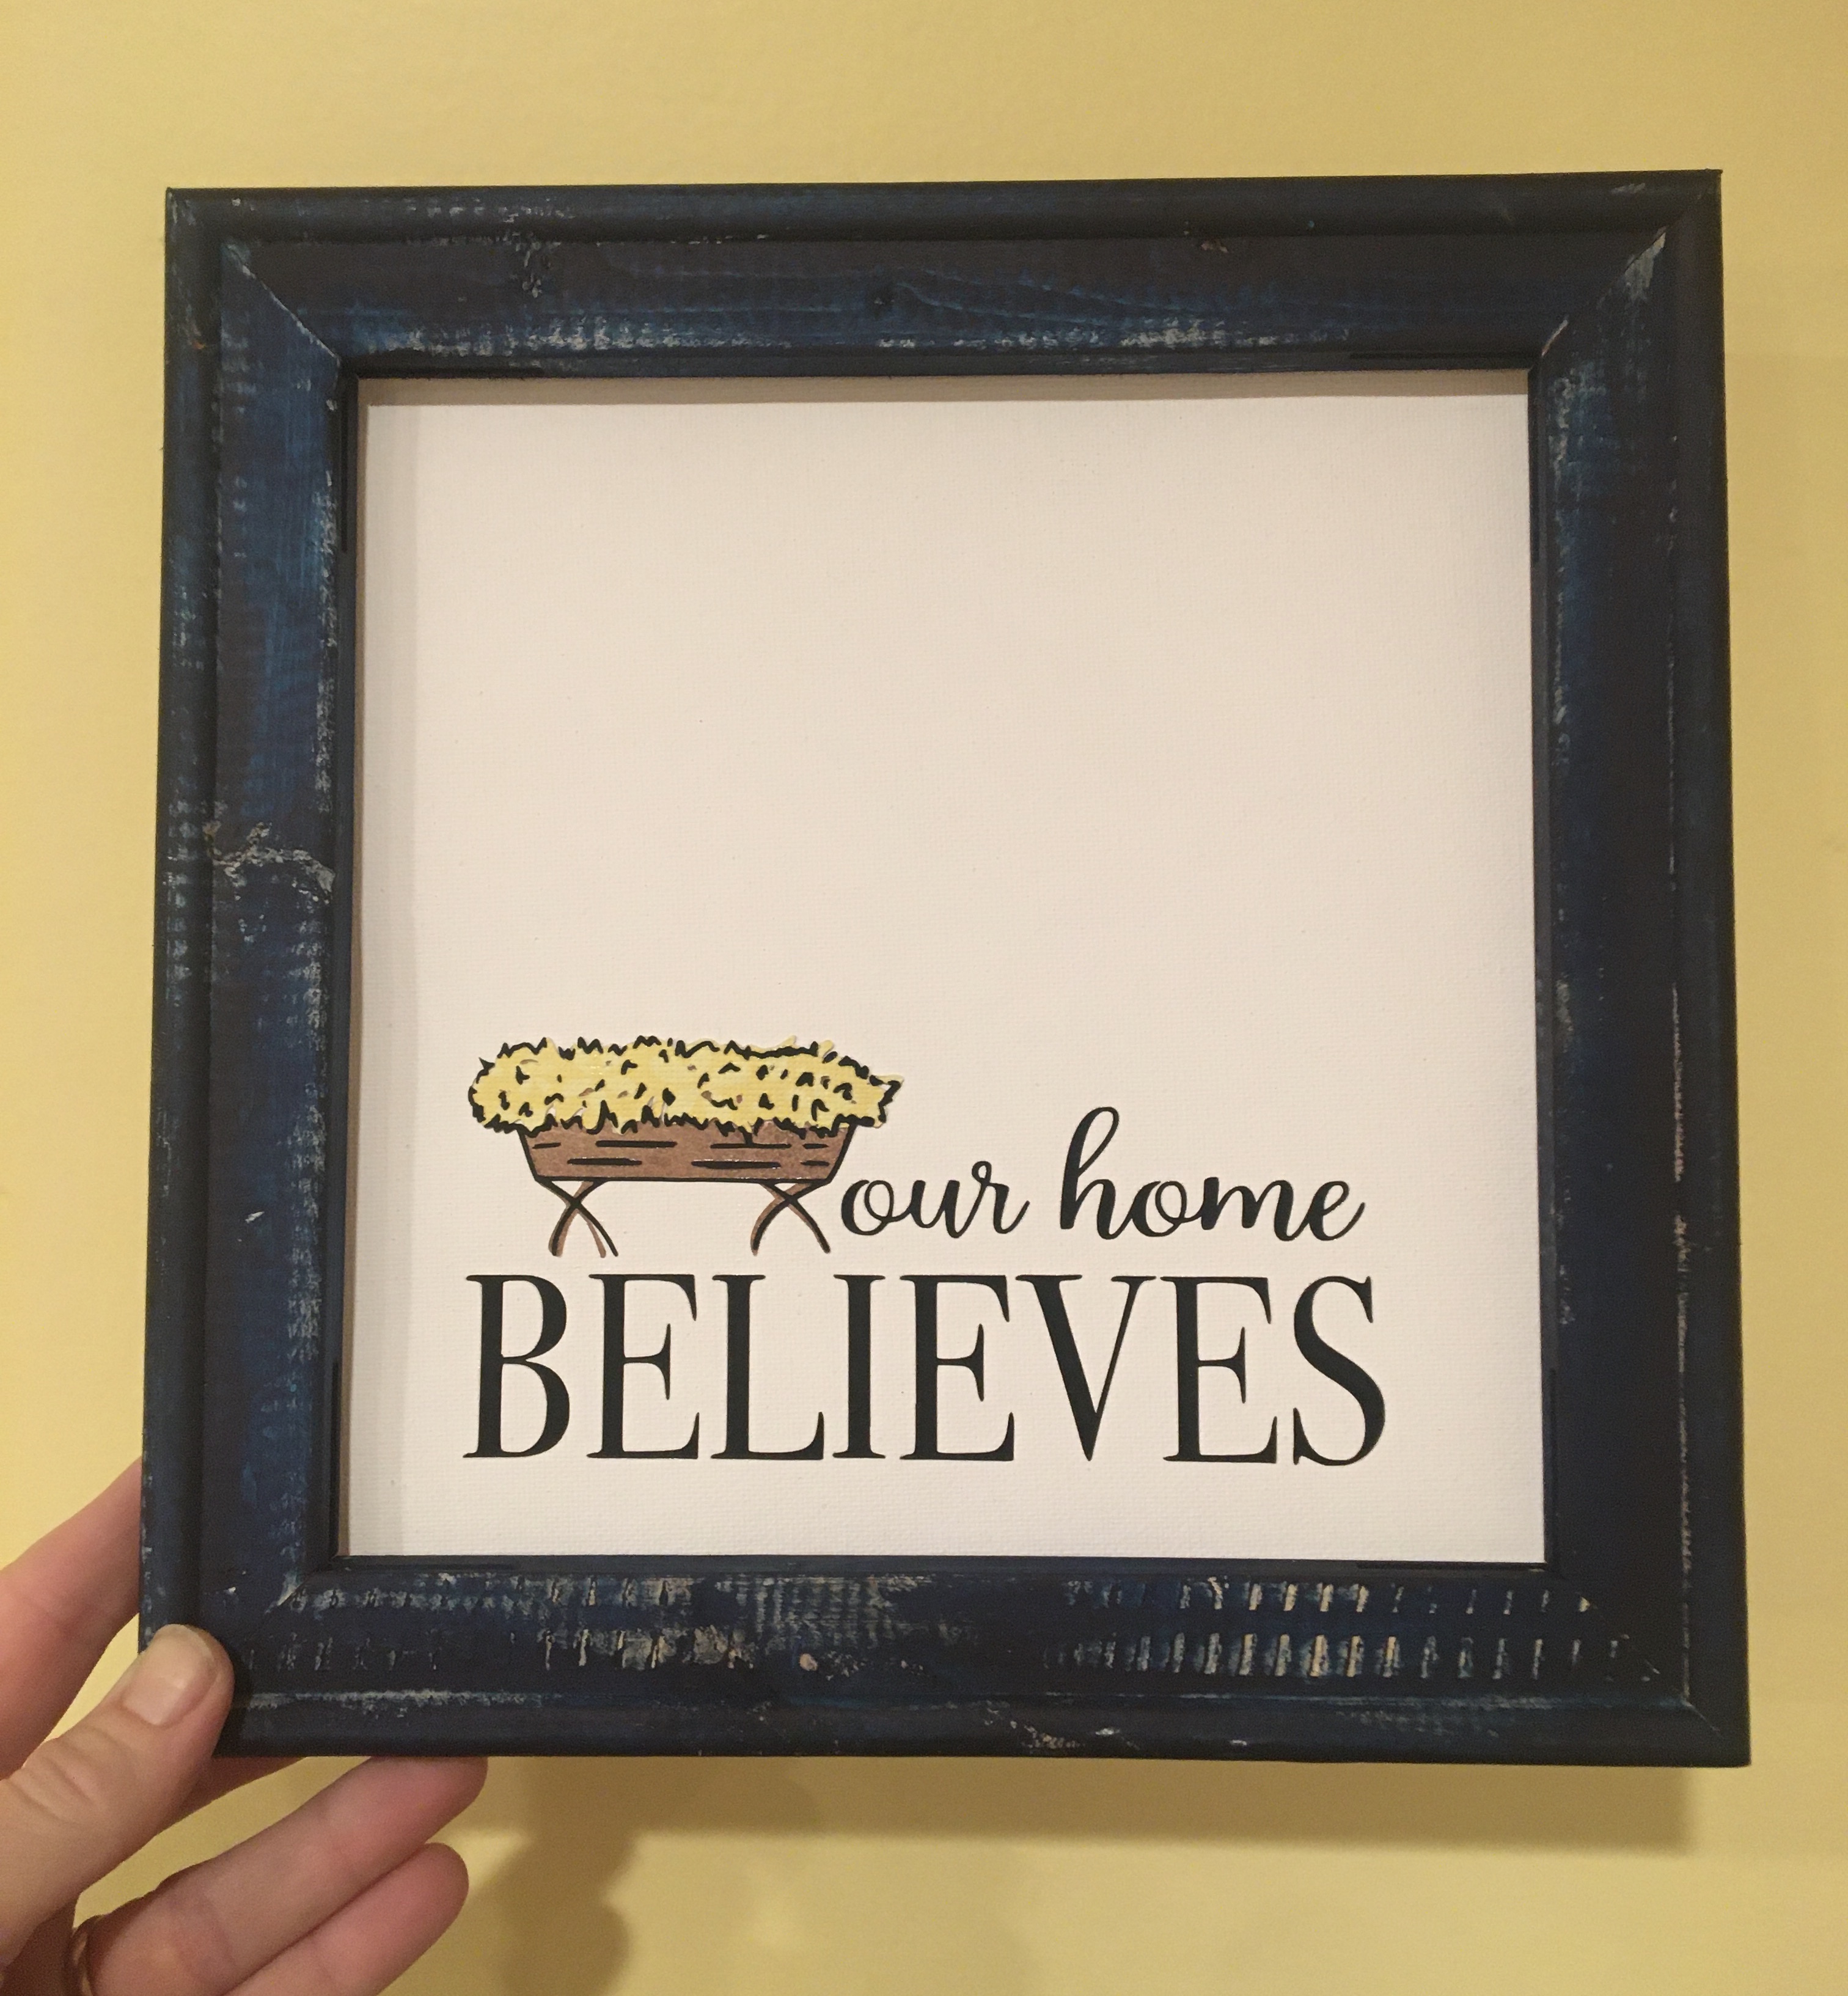 Christmas Market Crafts #ourhomebelieves #Christmas #sign #manger #reverse canvas